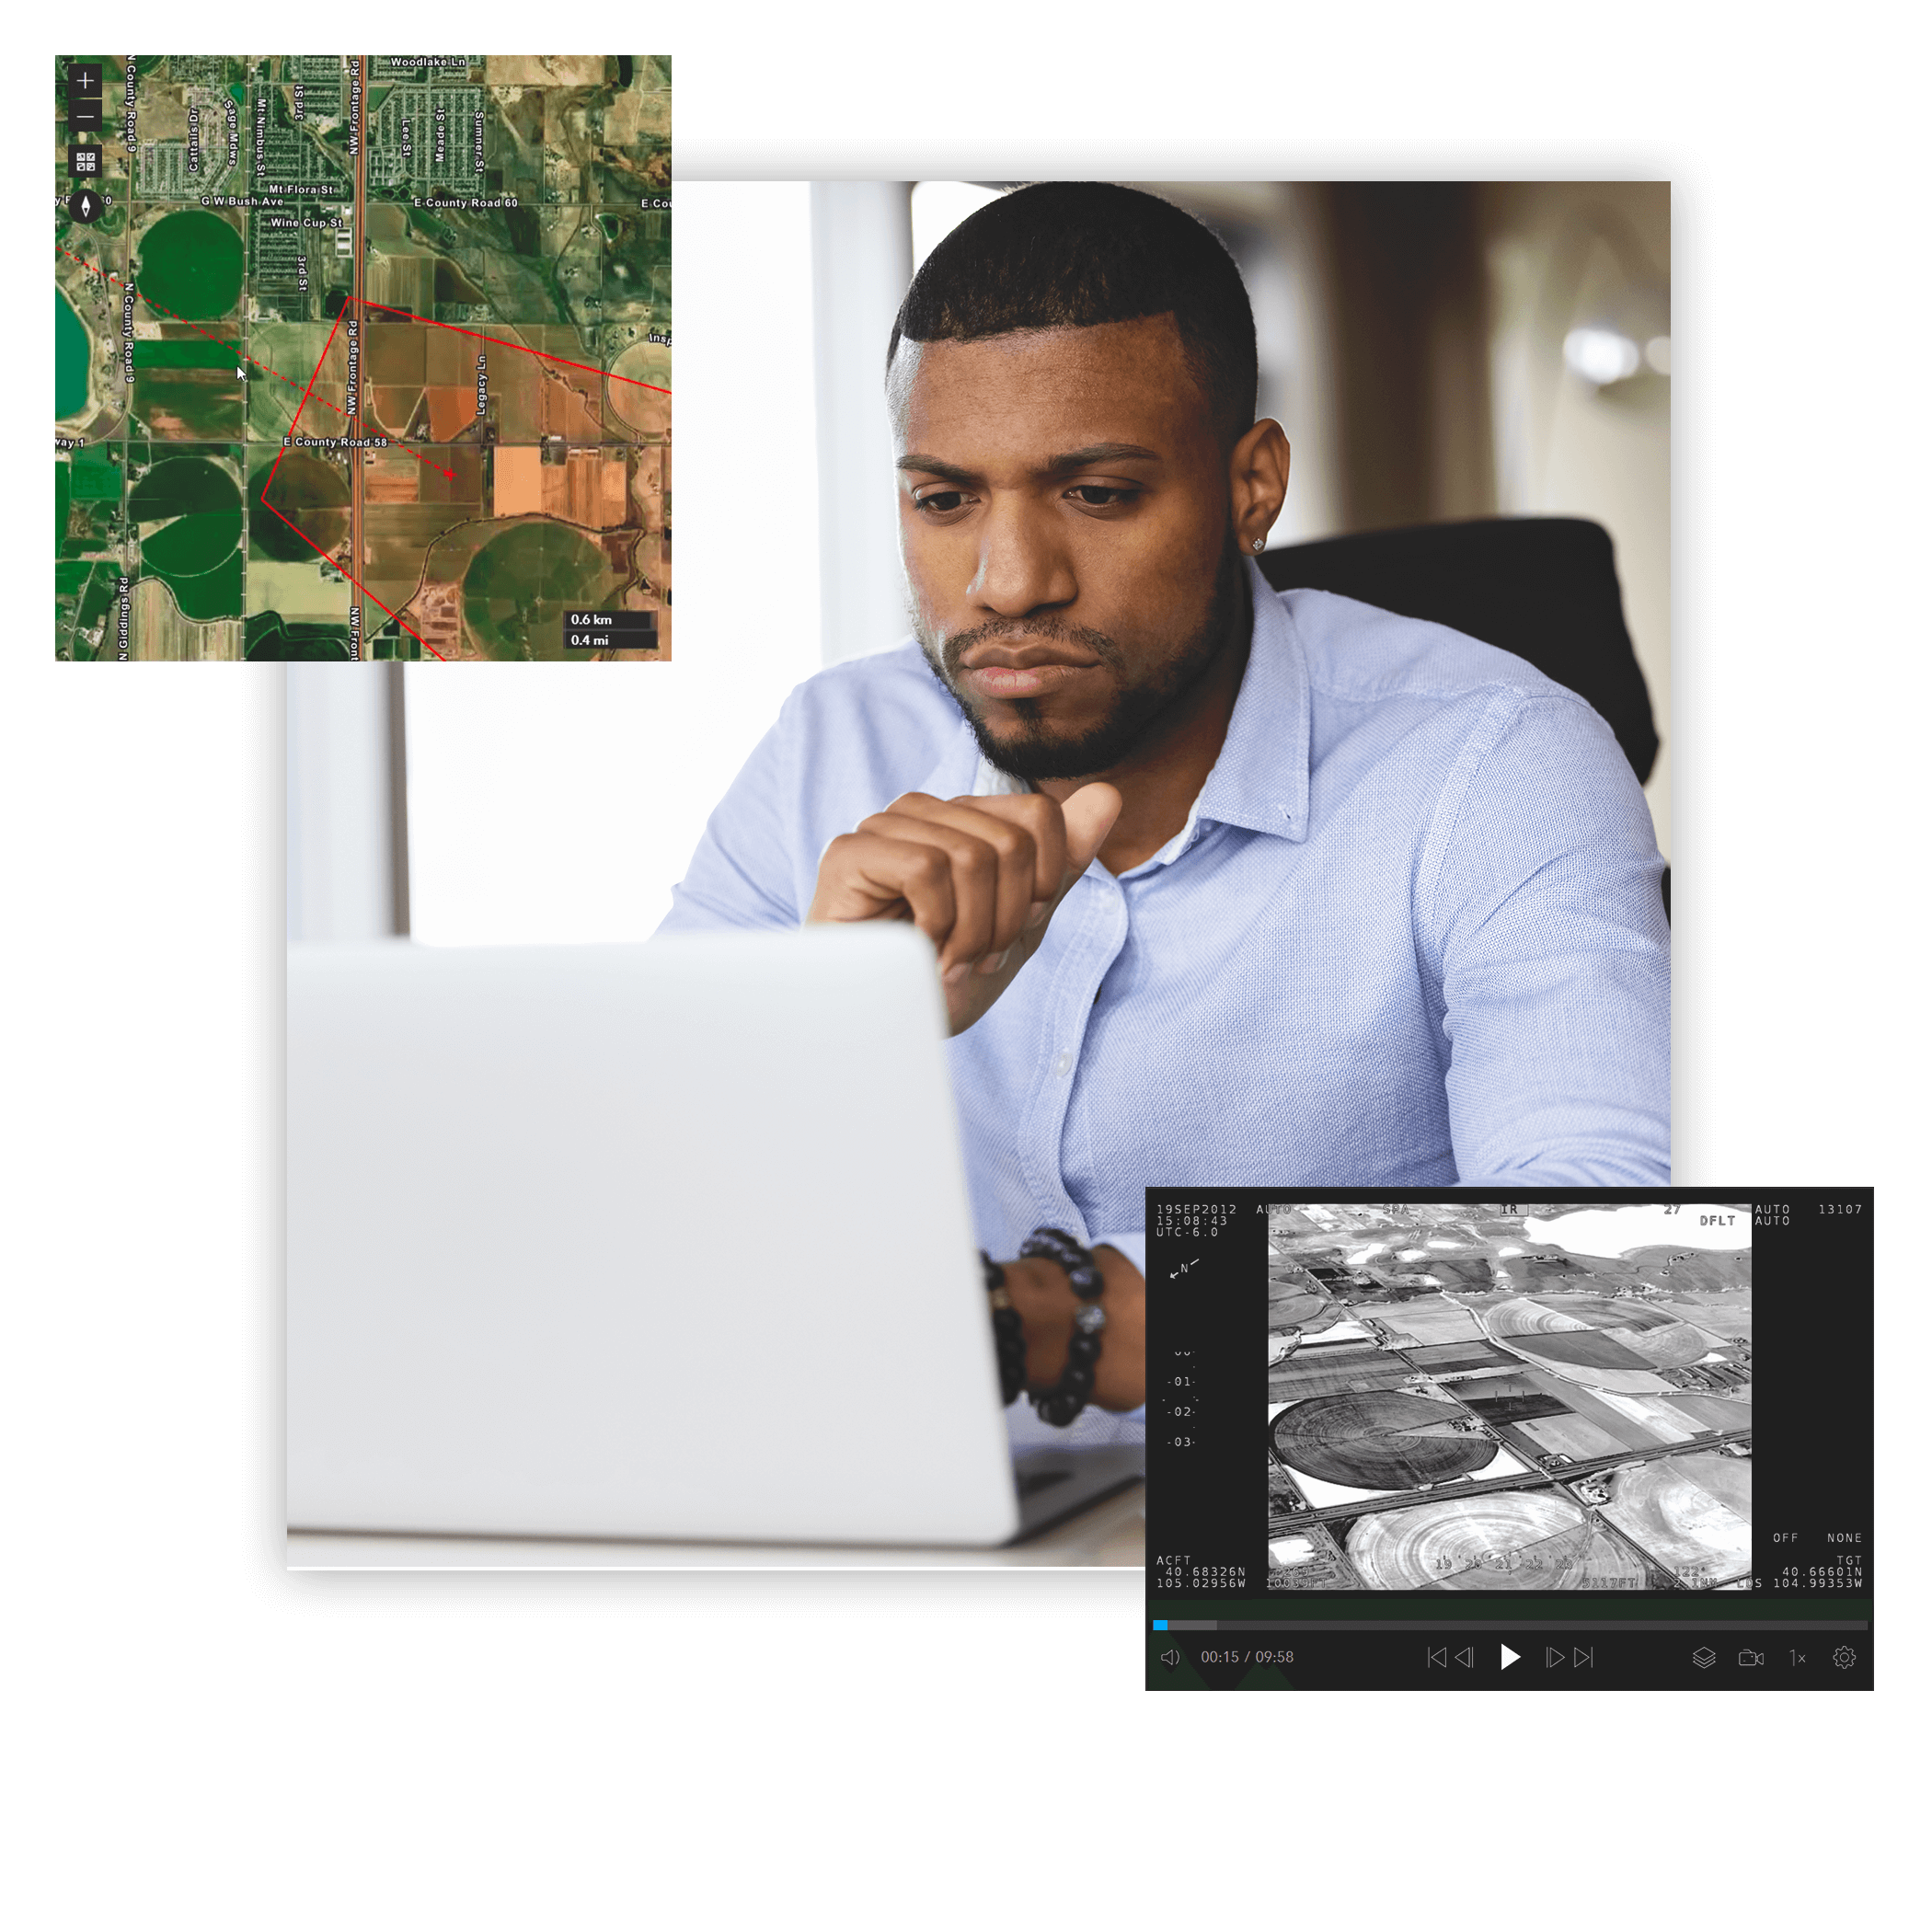 A person sitting at a desk looking contemplatively at a laptop, and a small map and an ArcGIS Video Server interface in the foreground